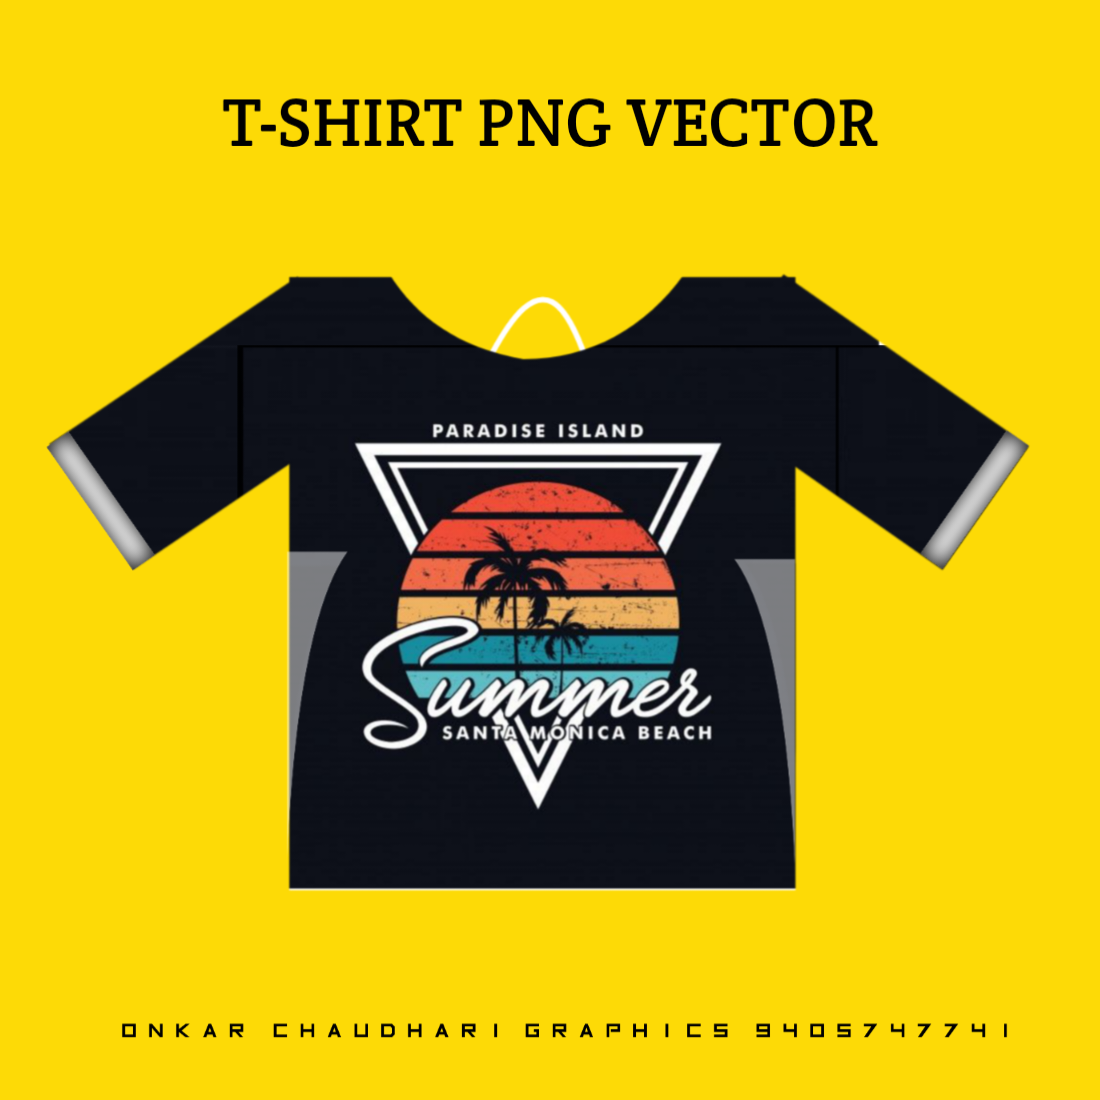 T-SHIRT Vector PNG cover image.